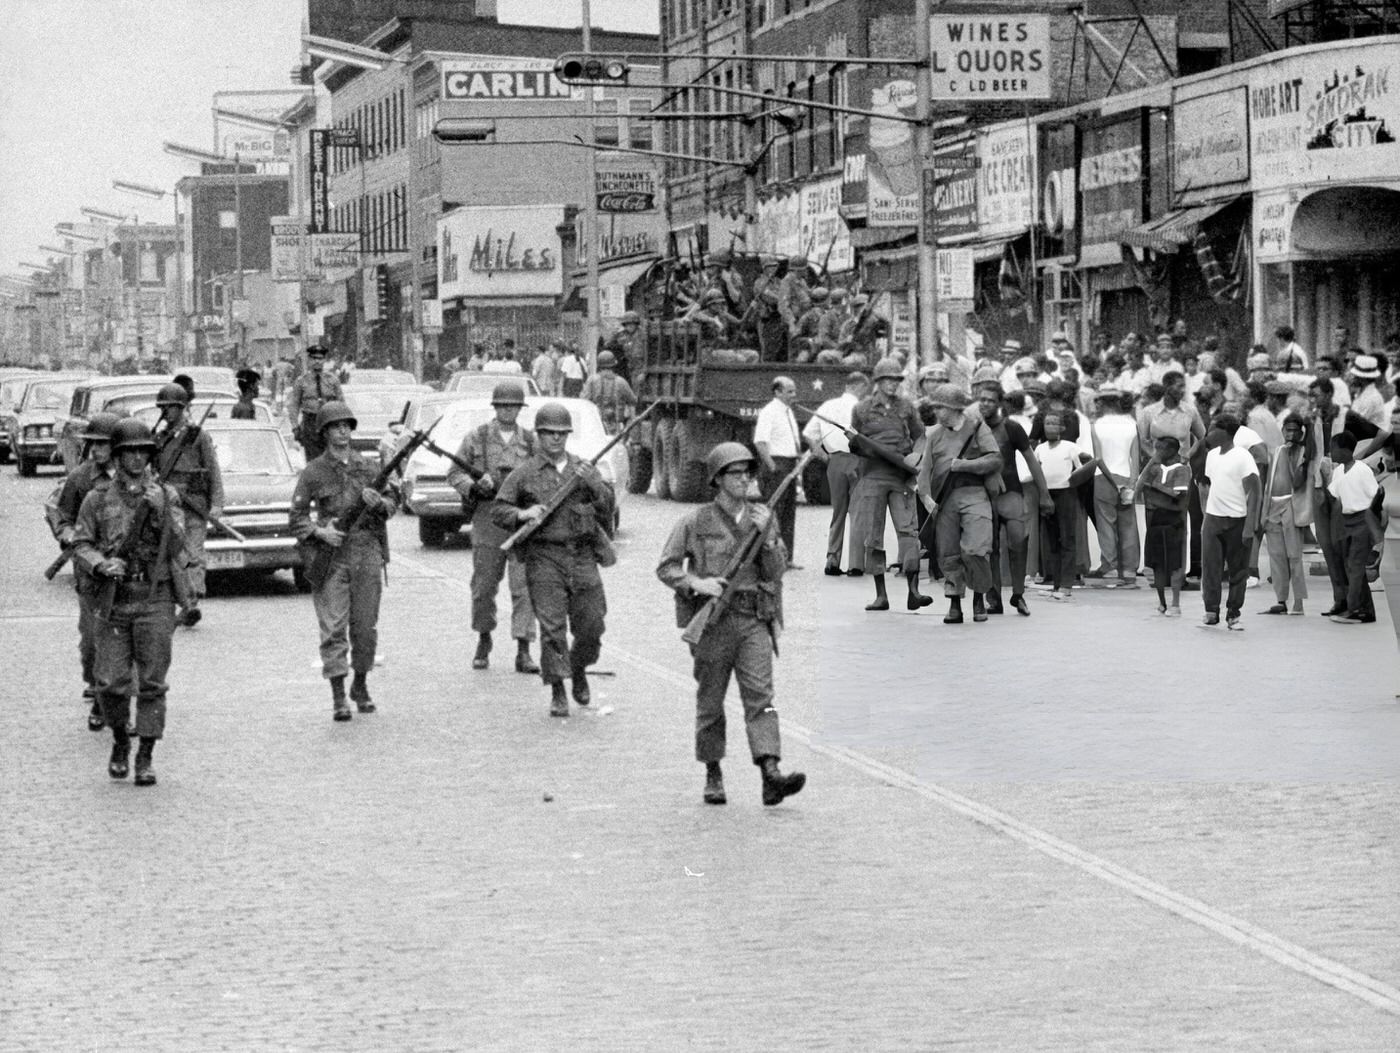 National Guard troops start to deploy into Springfield Ave., the scene of heavy rioting, 1960s.